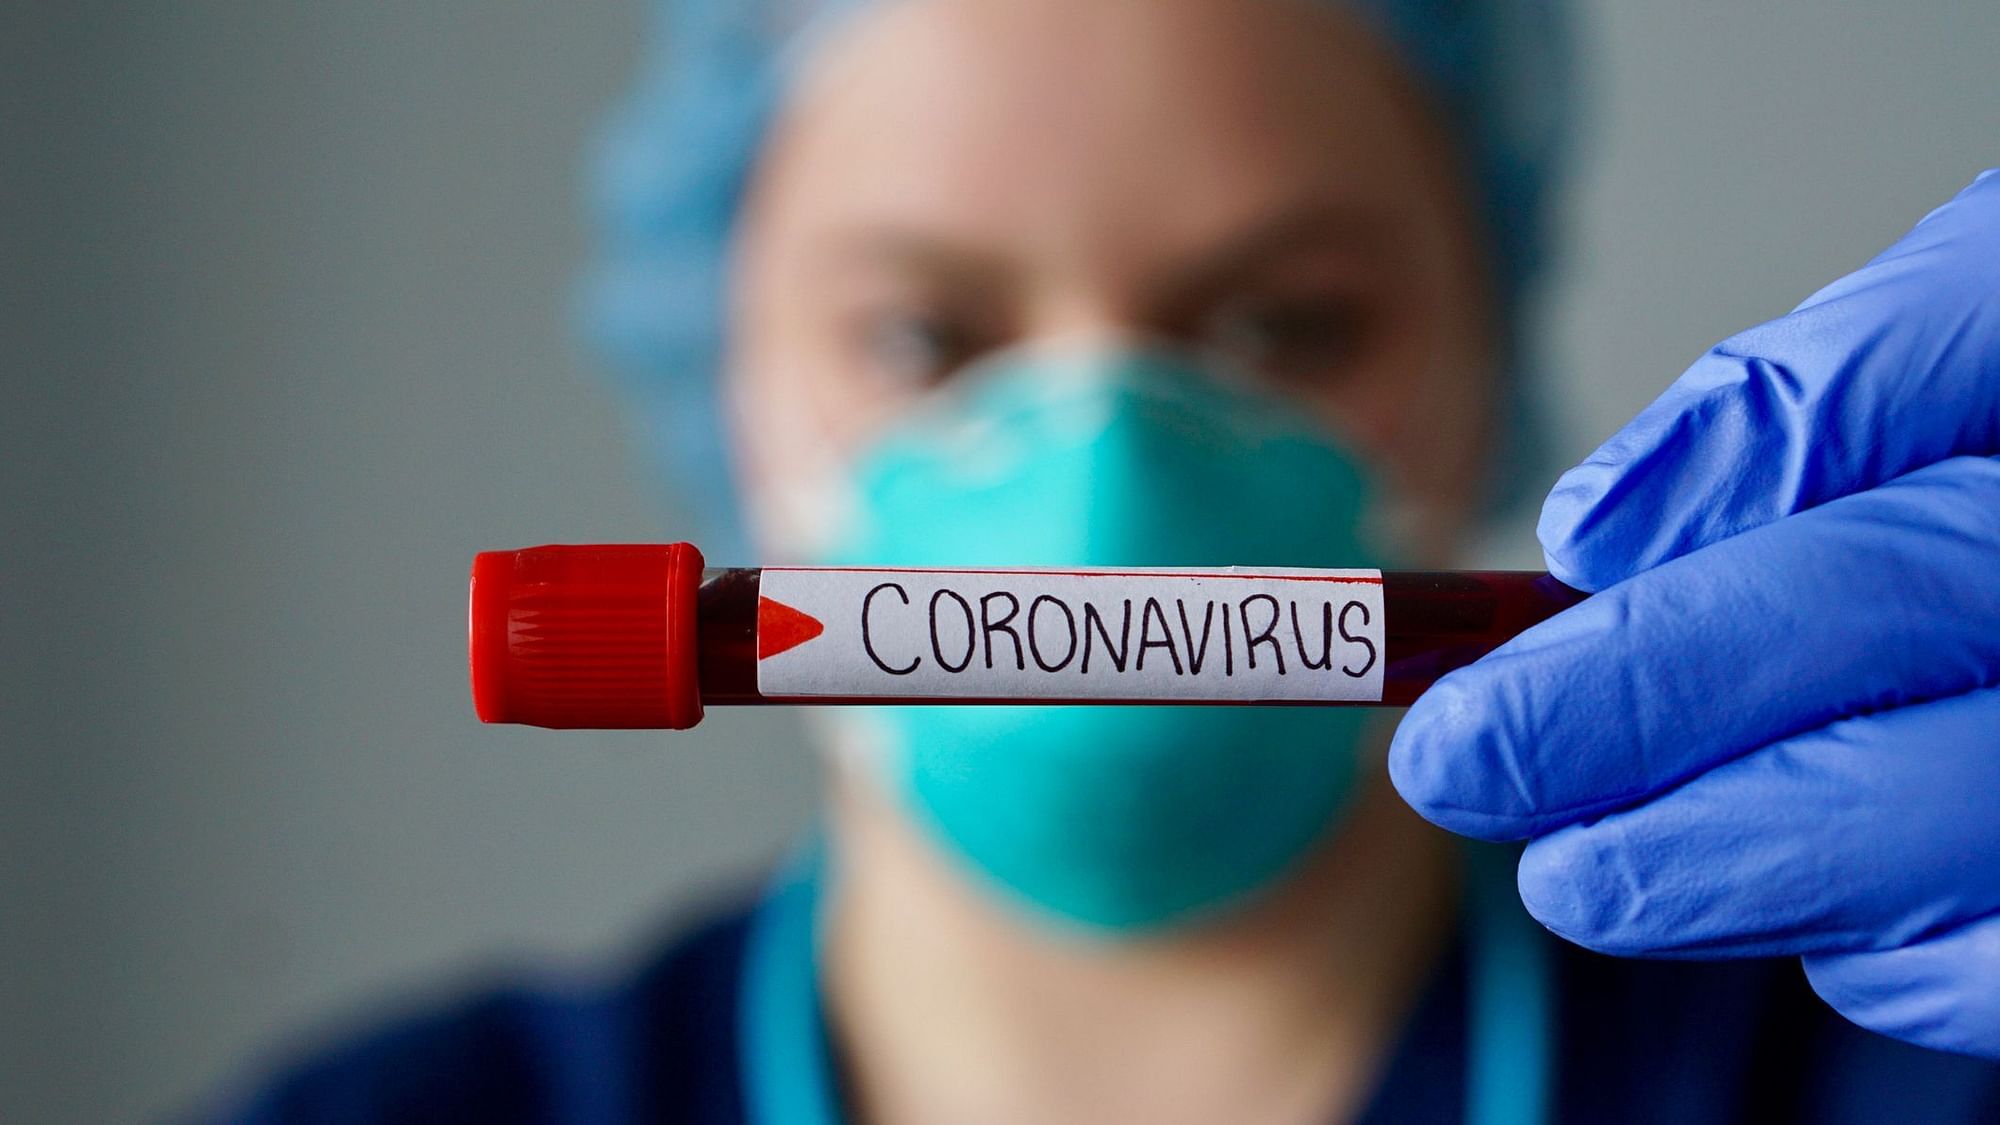 More than 5 lakh tests for coronavirus have been conducted in India in a single day for the past two consecutive days.